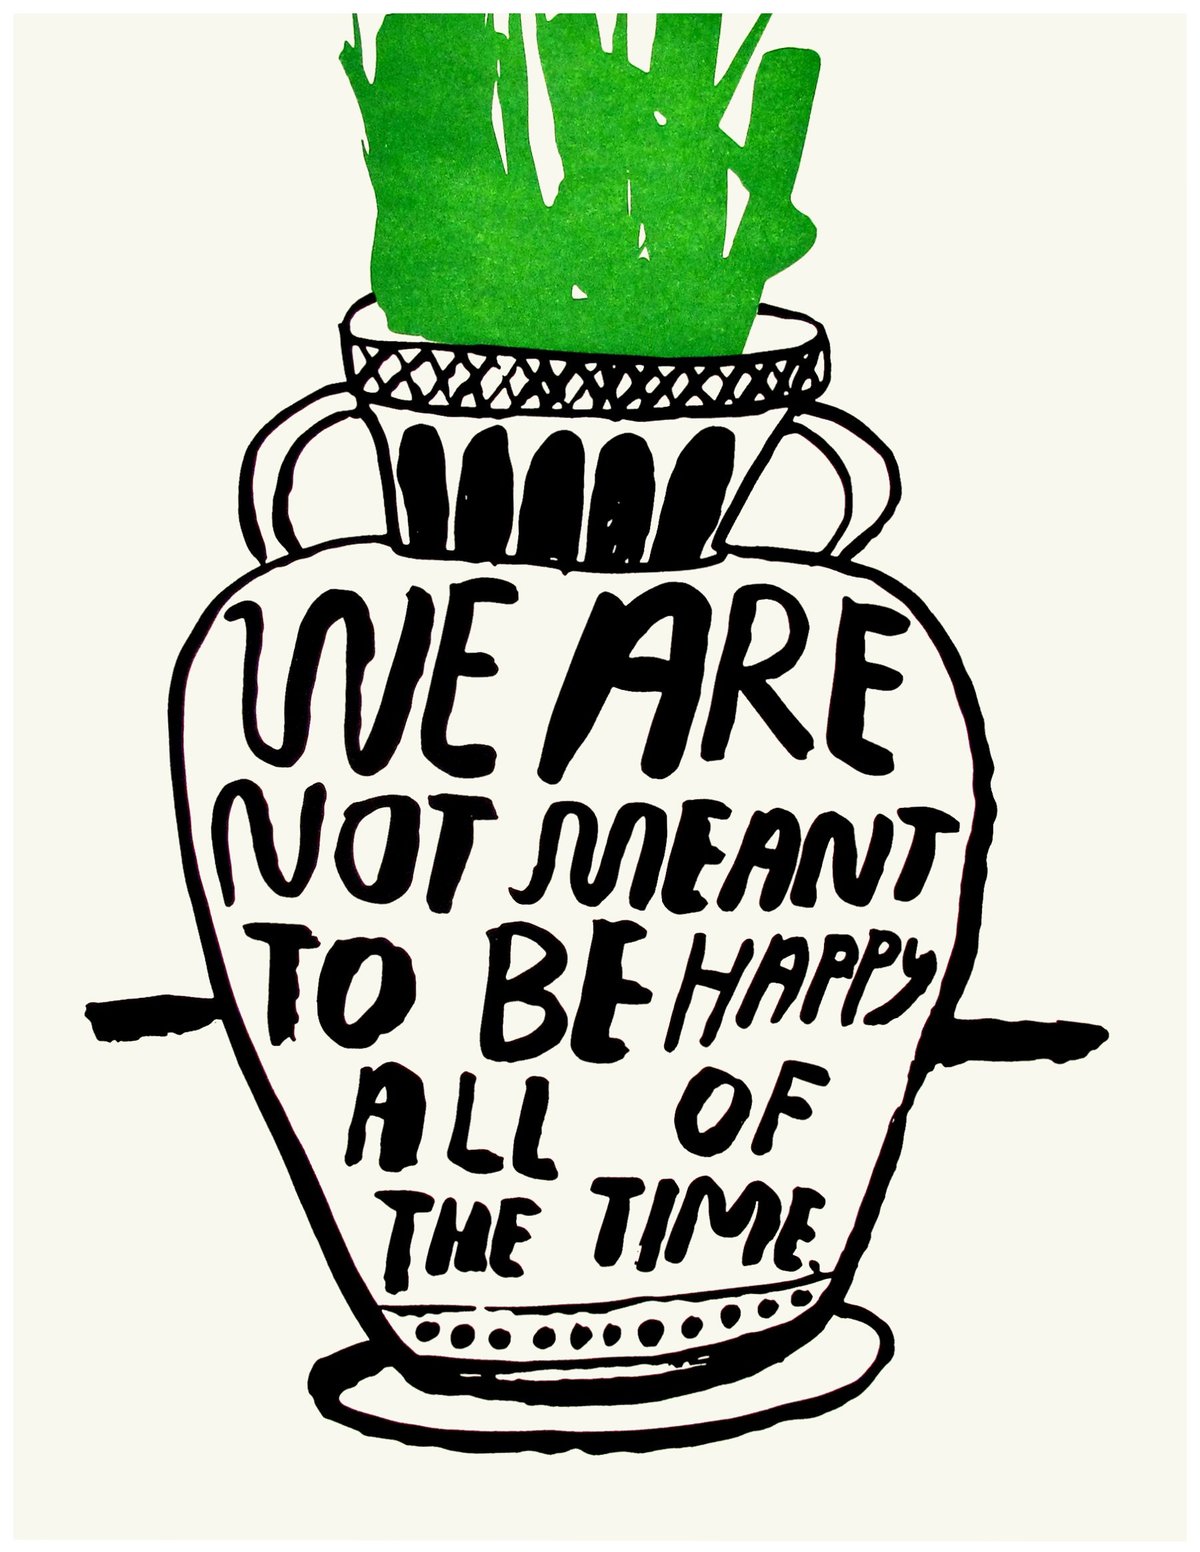 We Are Not Meant To Be Happy All Of The Time - P9517 - Preorder before July 8th!